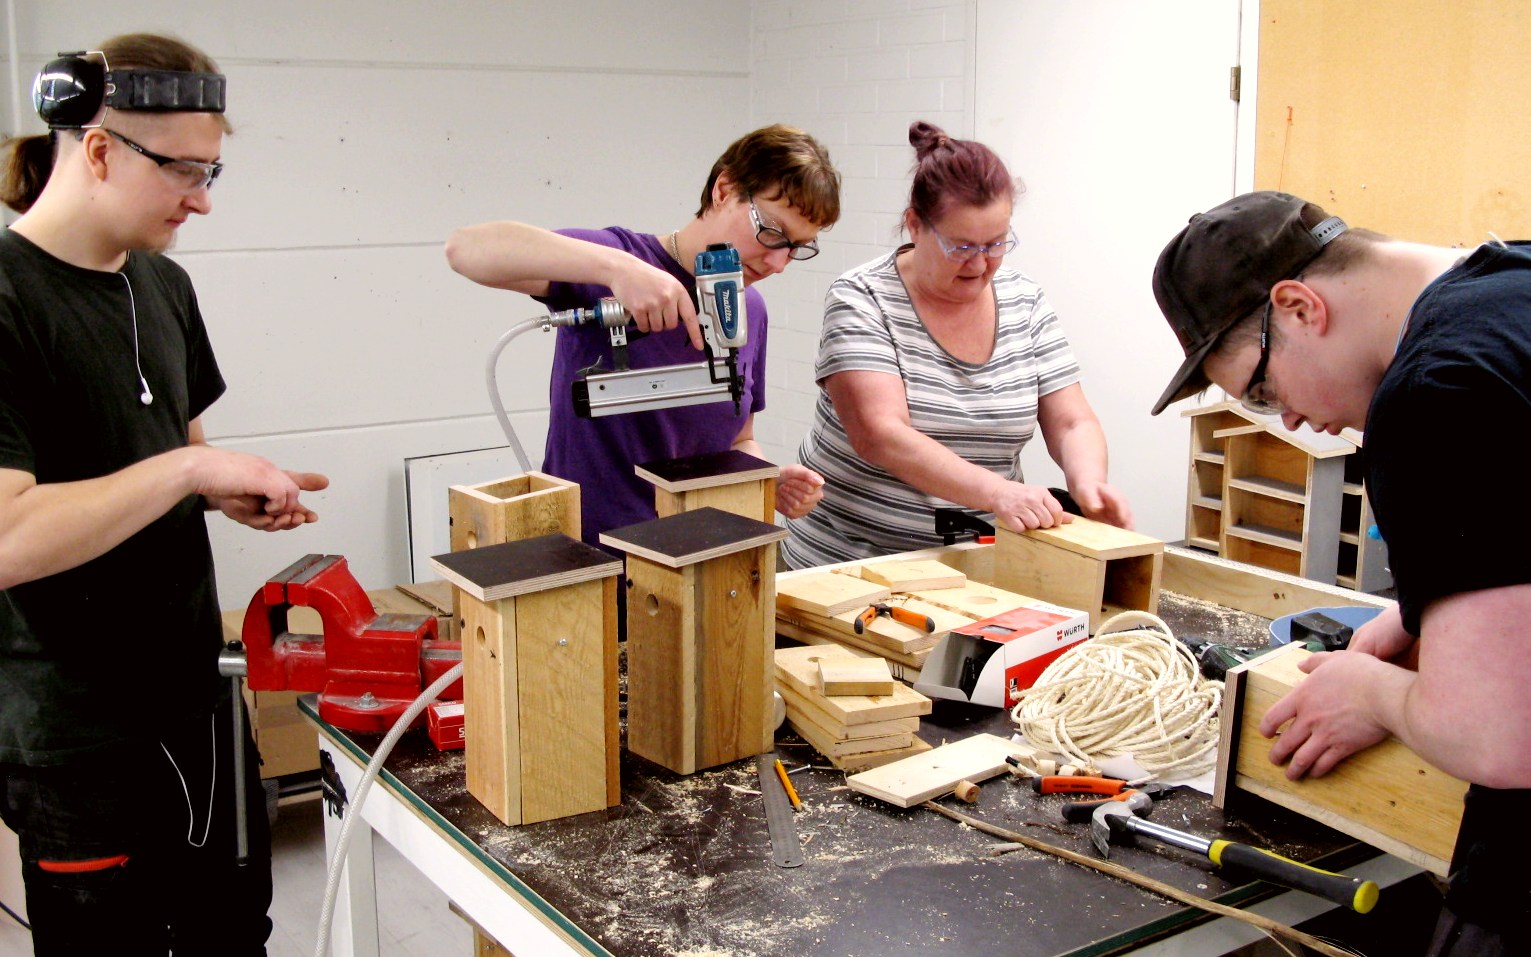 A desk with some self-made birdhouses in various stages. Four people are working on them.